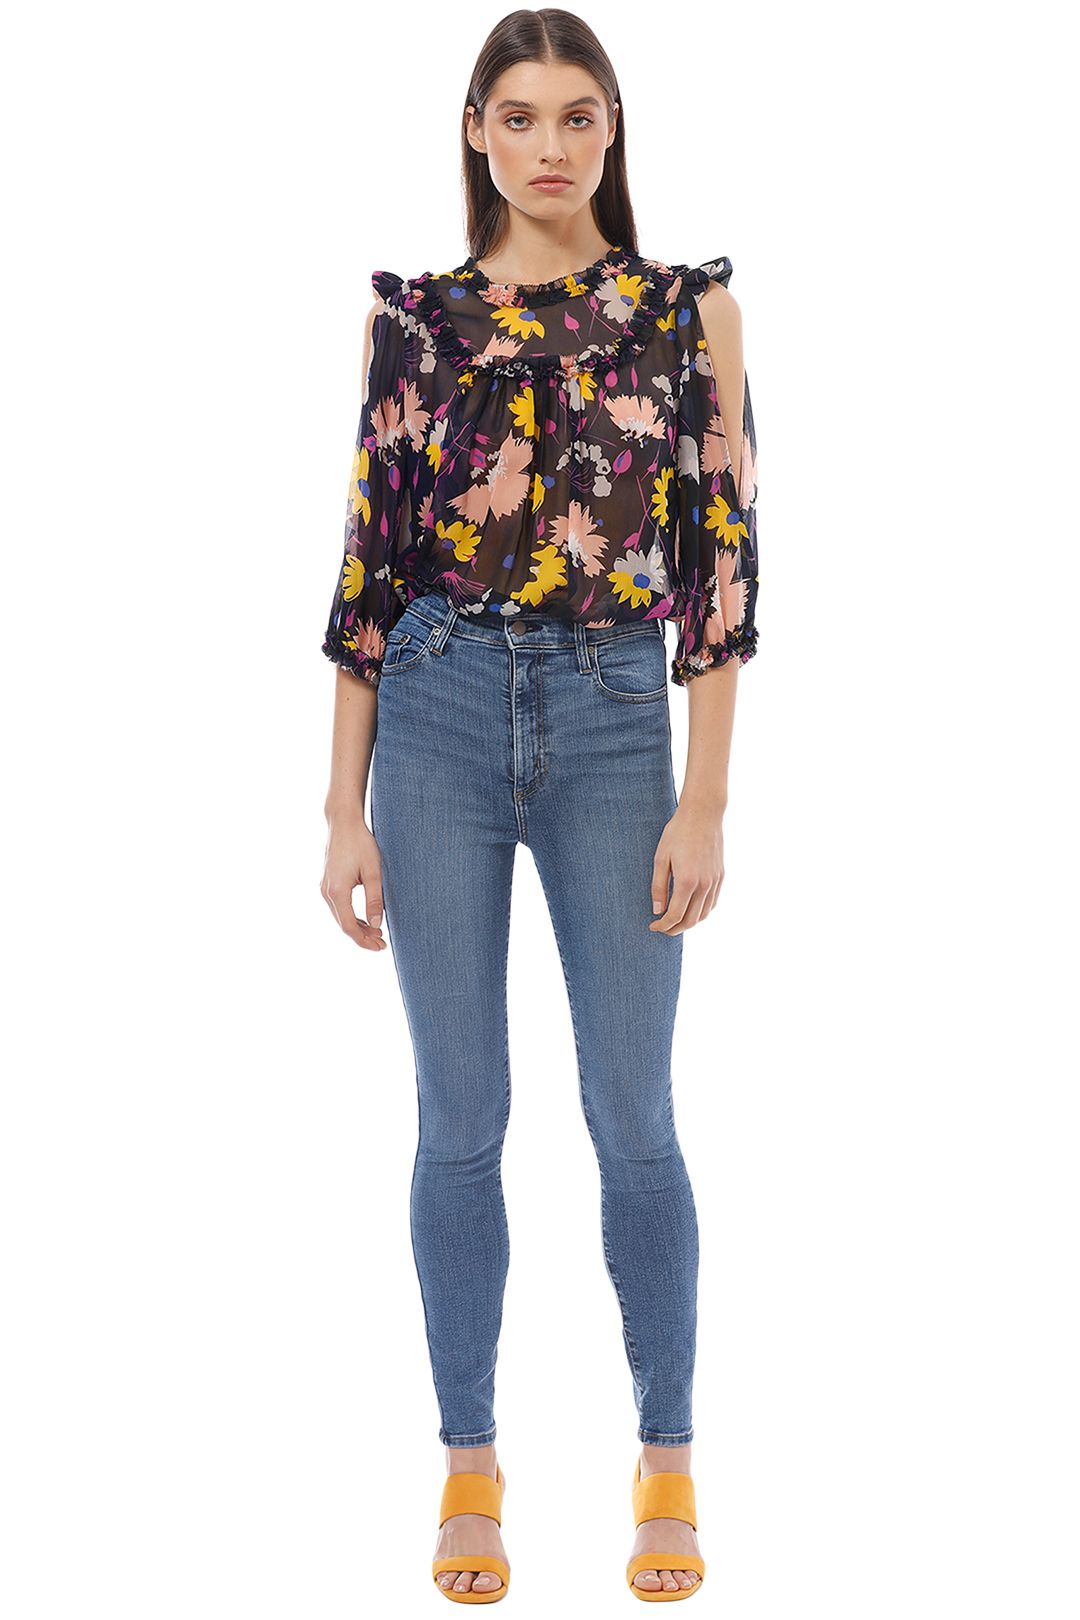 Alice McCall - Diamond Eyes Blouse - Black Floral - Front